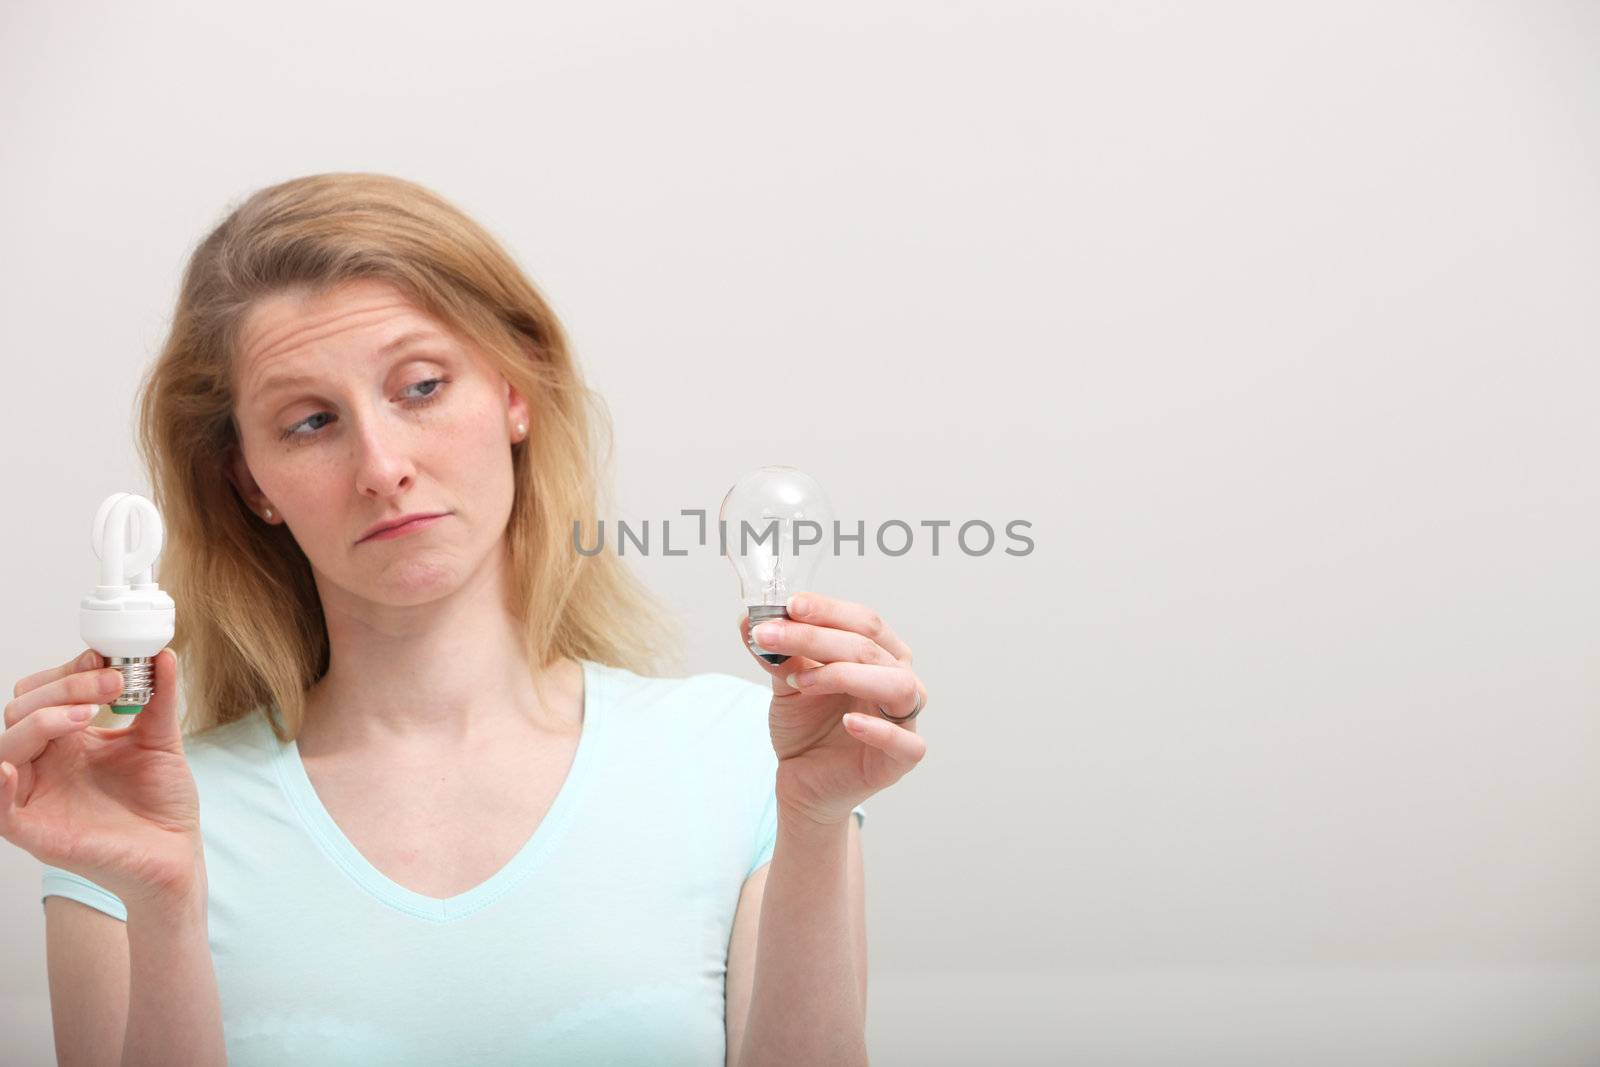 Woman holding an eco-friendly spiral light bulb in one hand is eyeing an old incandescent bulb in her other hand with disdain